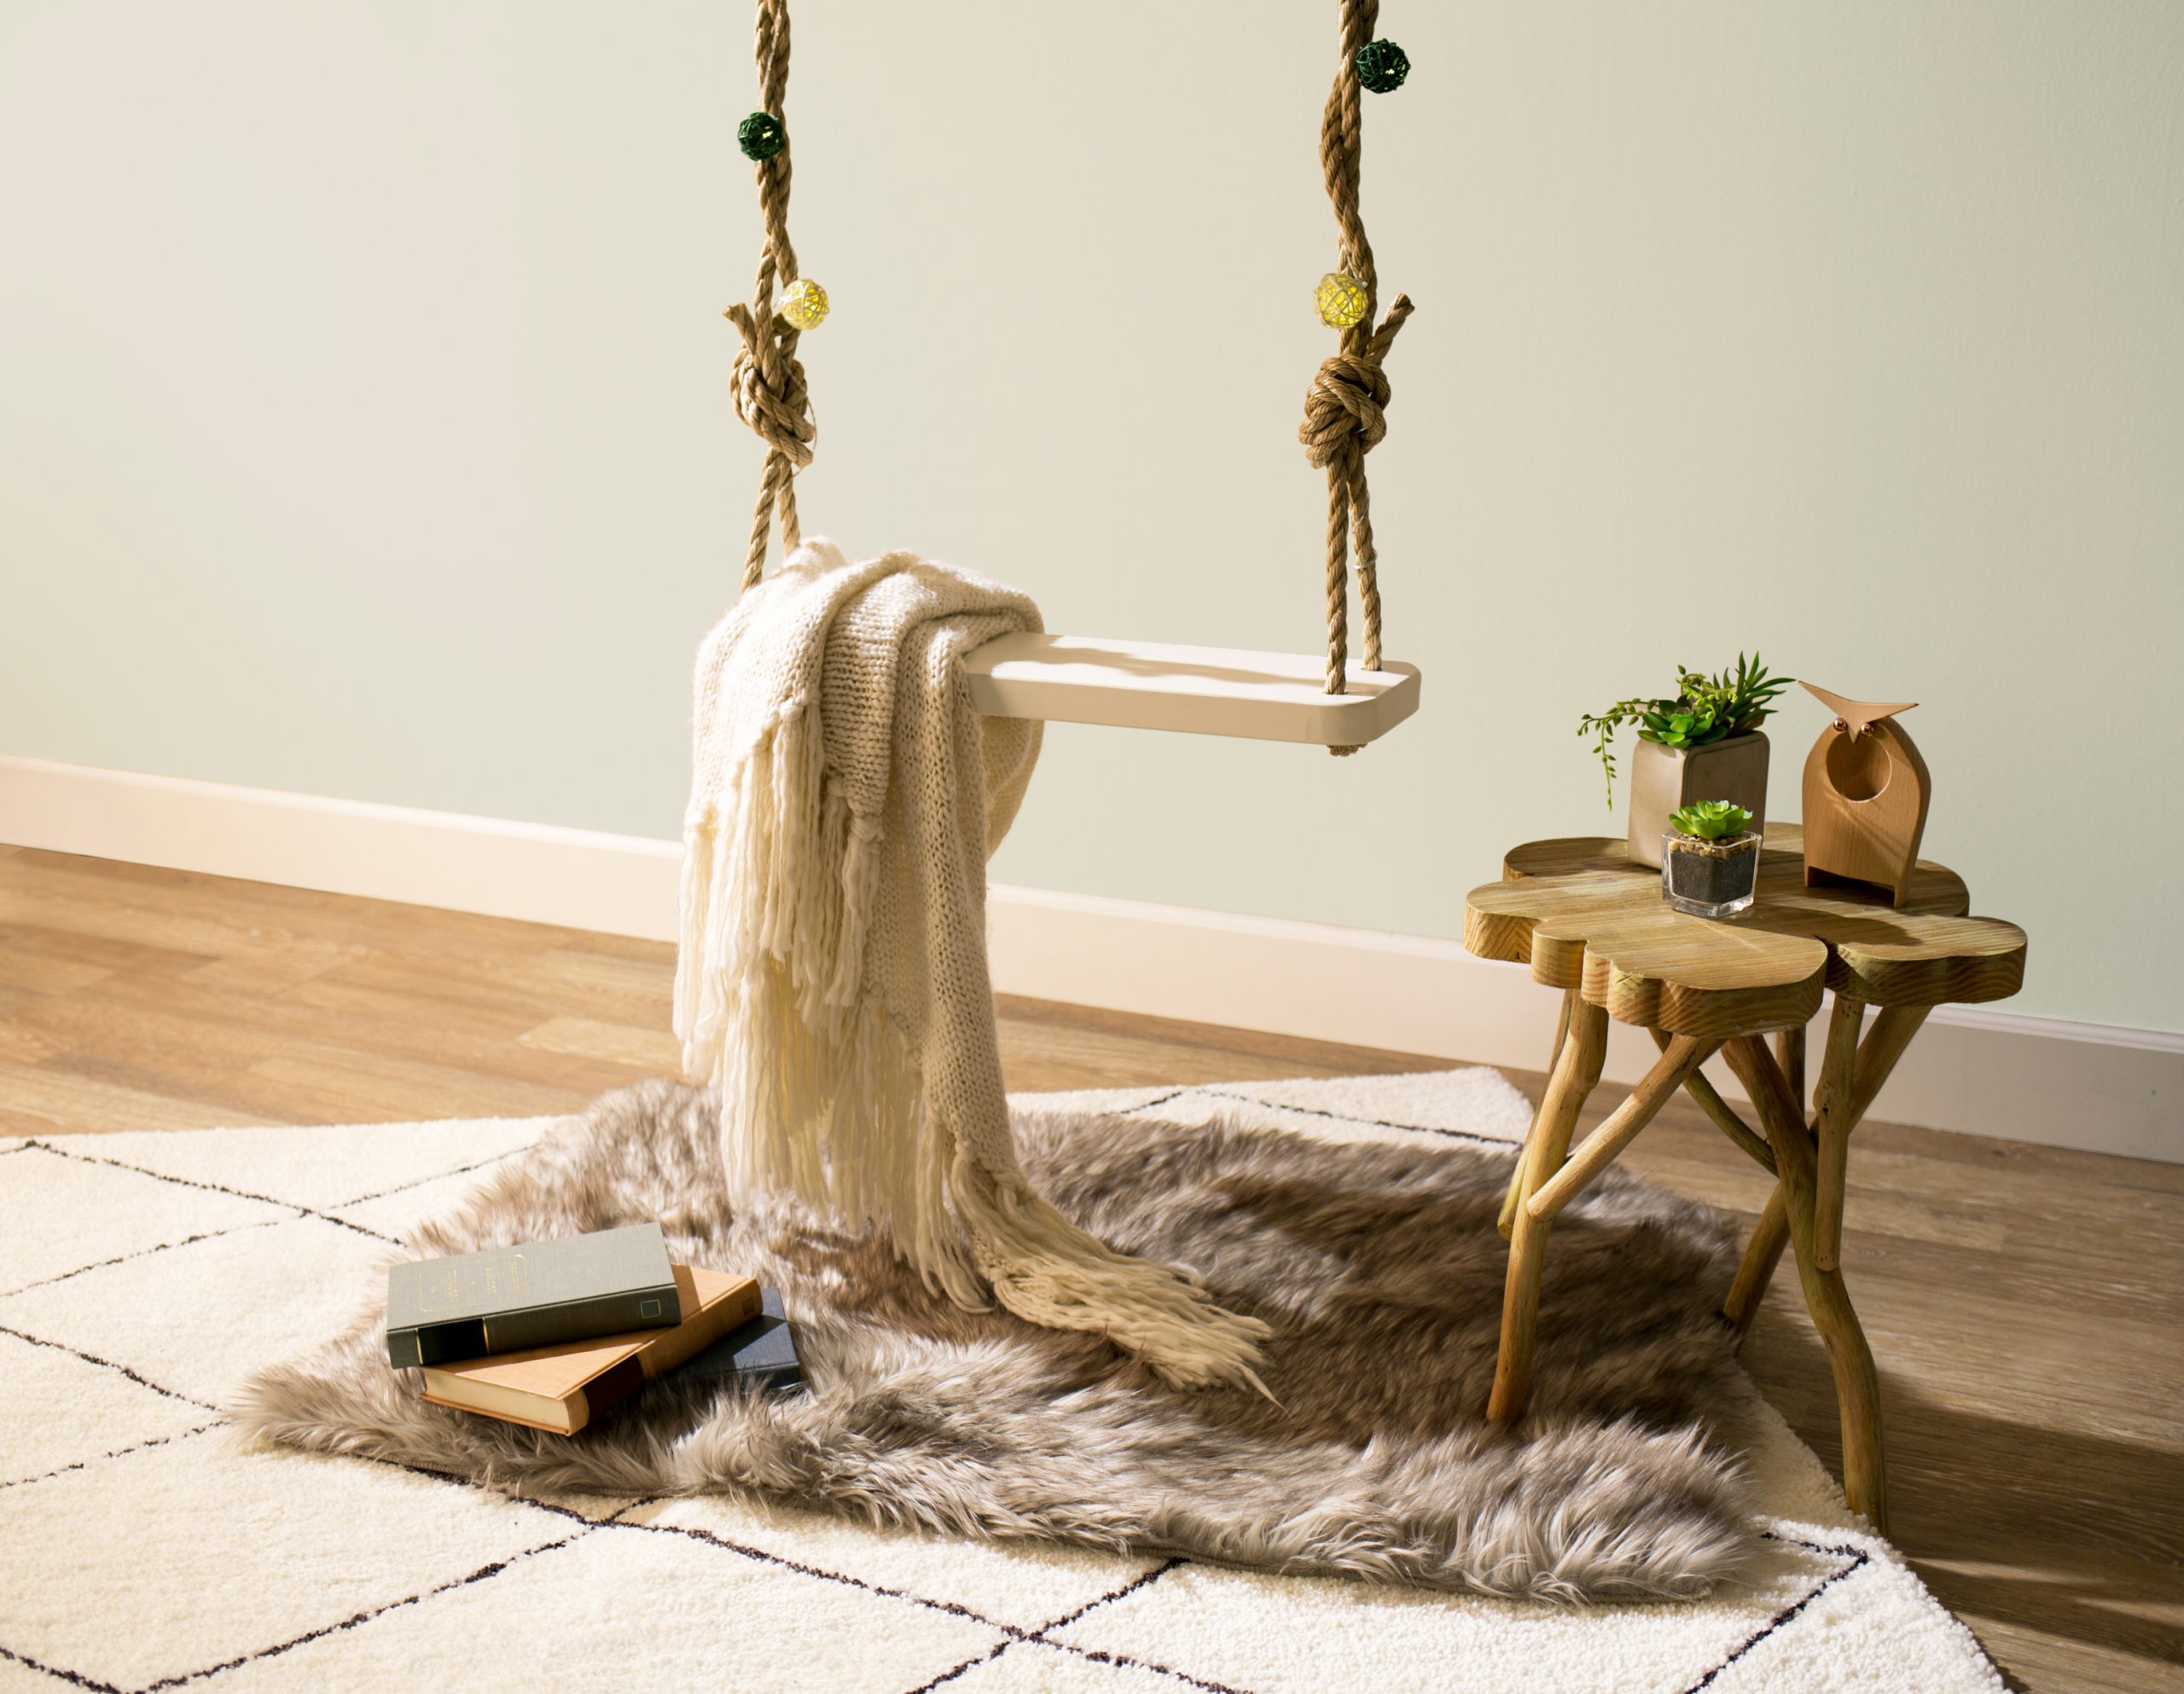 A tight crop of the swing and table next to swing with plants. Image also shows the floor with fluffy rugs and books.